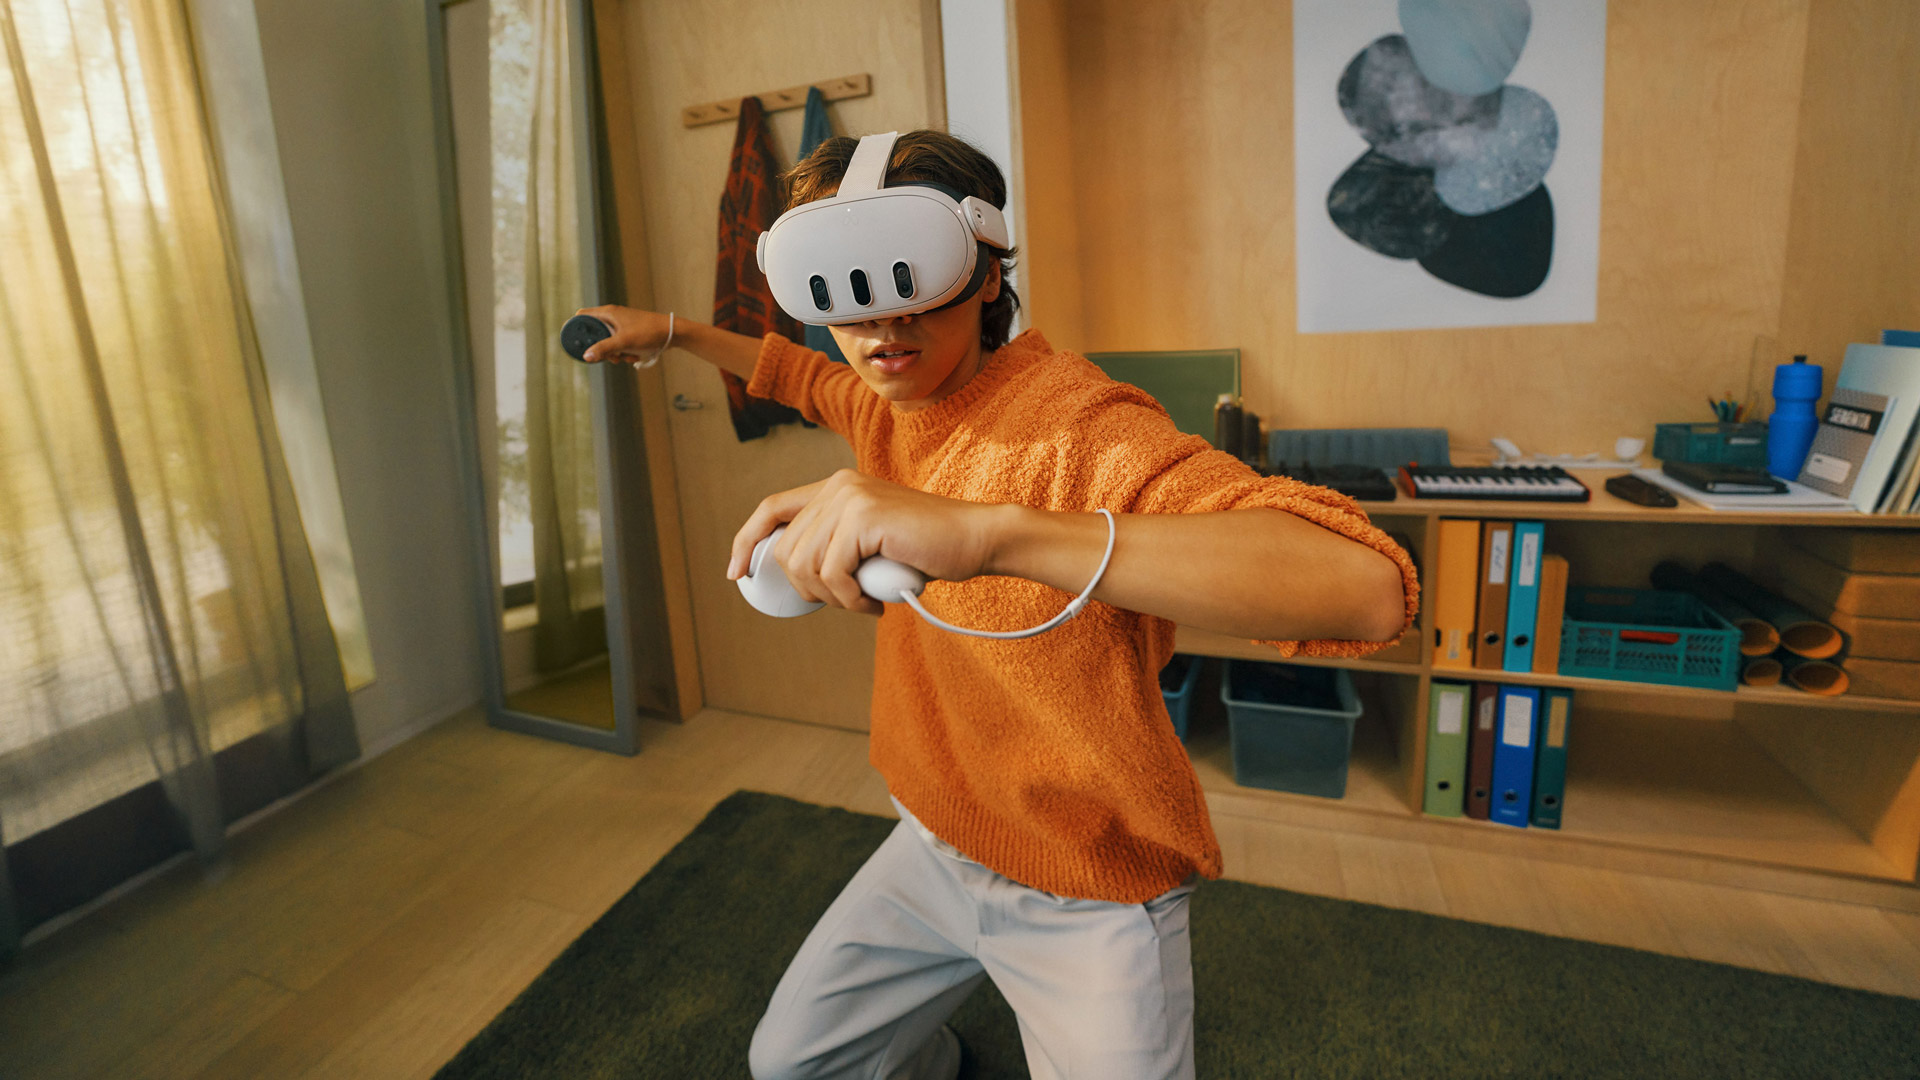 Meta Reportedly to Return to China, Spearheading with Cheaper VR Headset